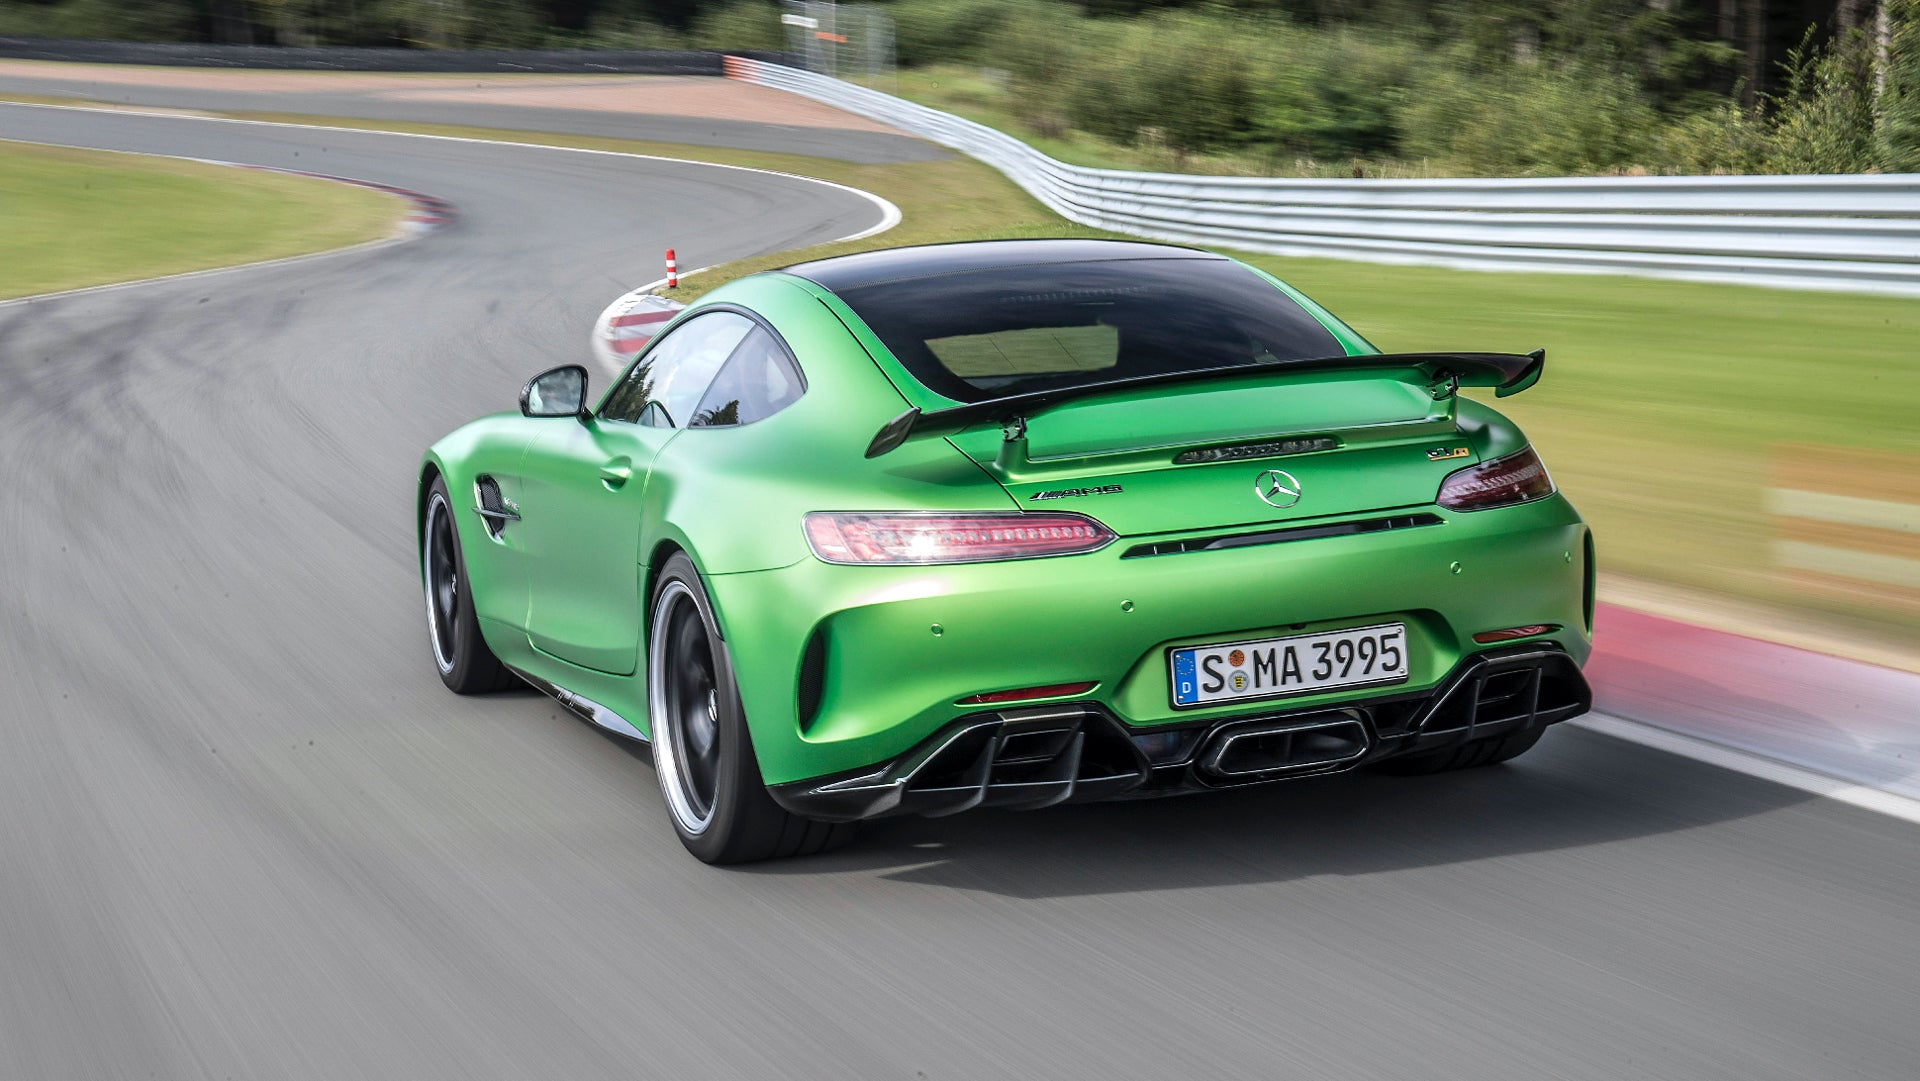 Mercedes-AMG GT R Discontinued to Make Room for the Black Series and Stealth Editions